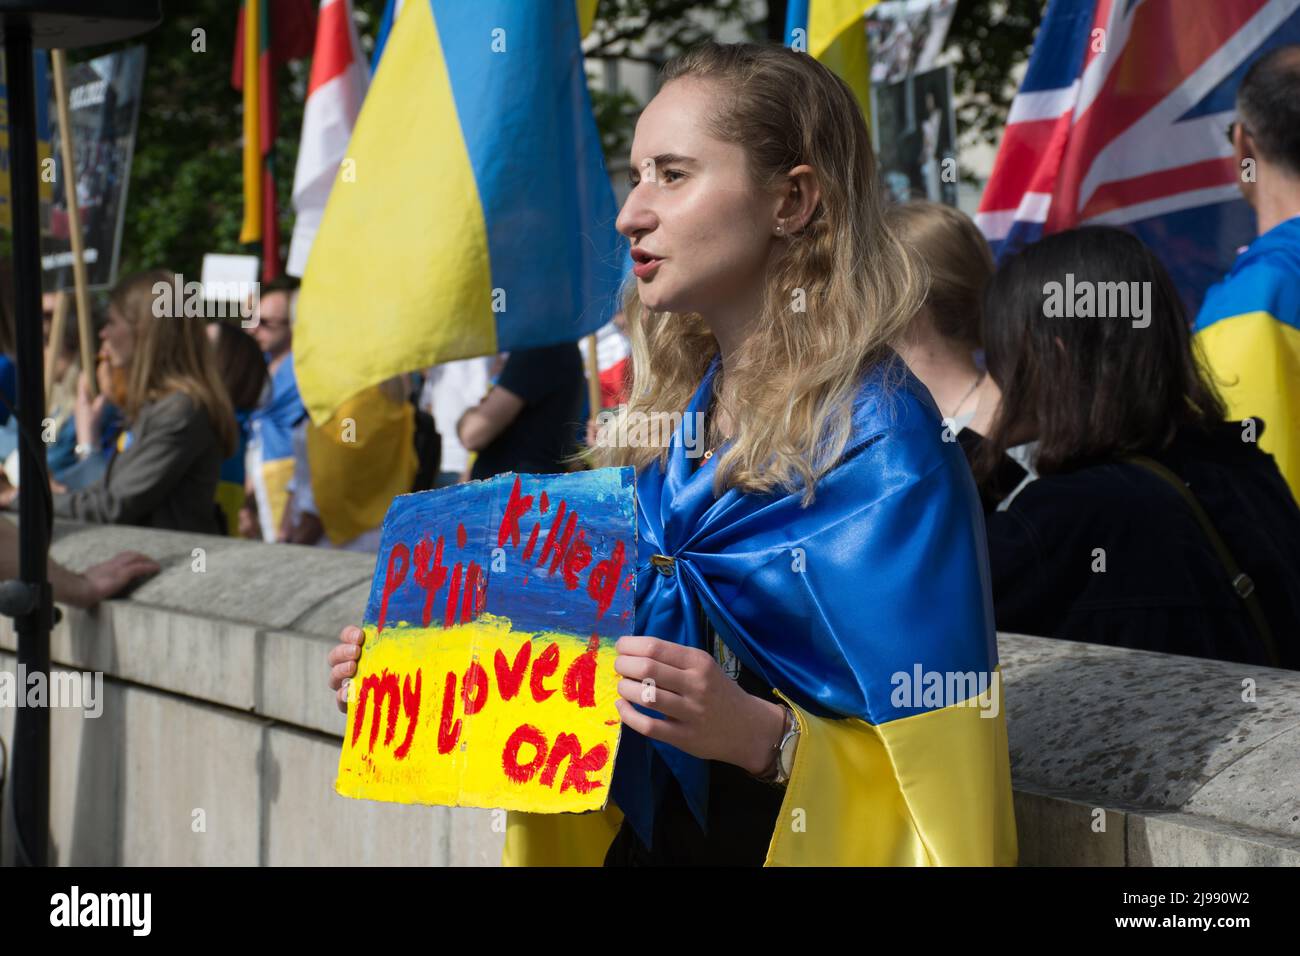 Ukraine wants more arms after Ukrainian troops ‘surrender’ at Mariupol steelworks. Ukraine is an independent nation, and we are entitled to stand up for ourselves outside Downing street, London, UK. - 21 May 2022. Stock Photo